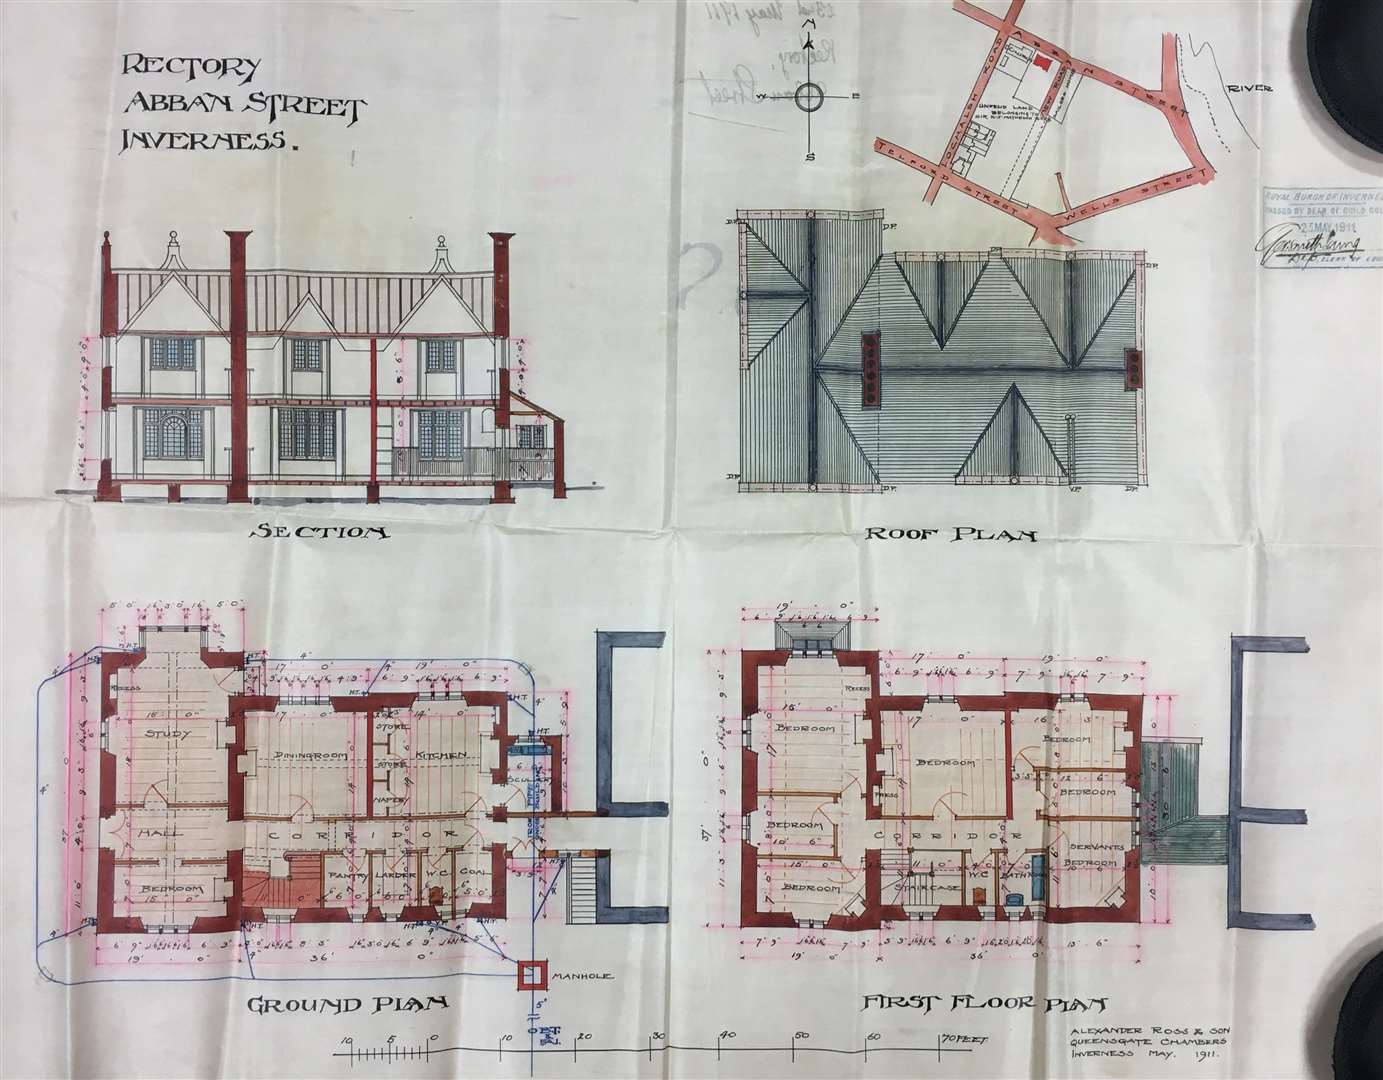 Rectory plans from 1911.